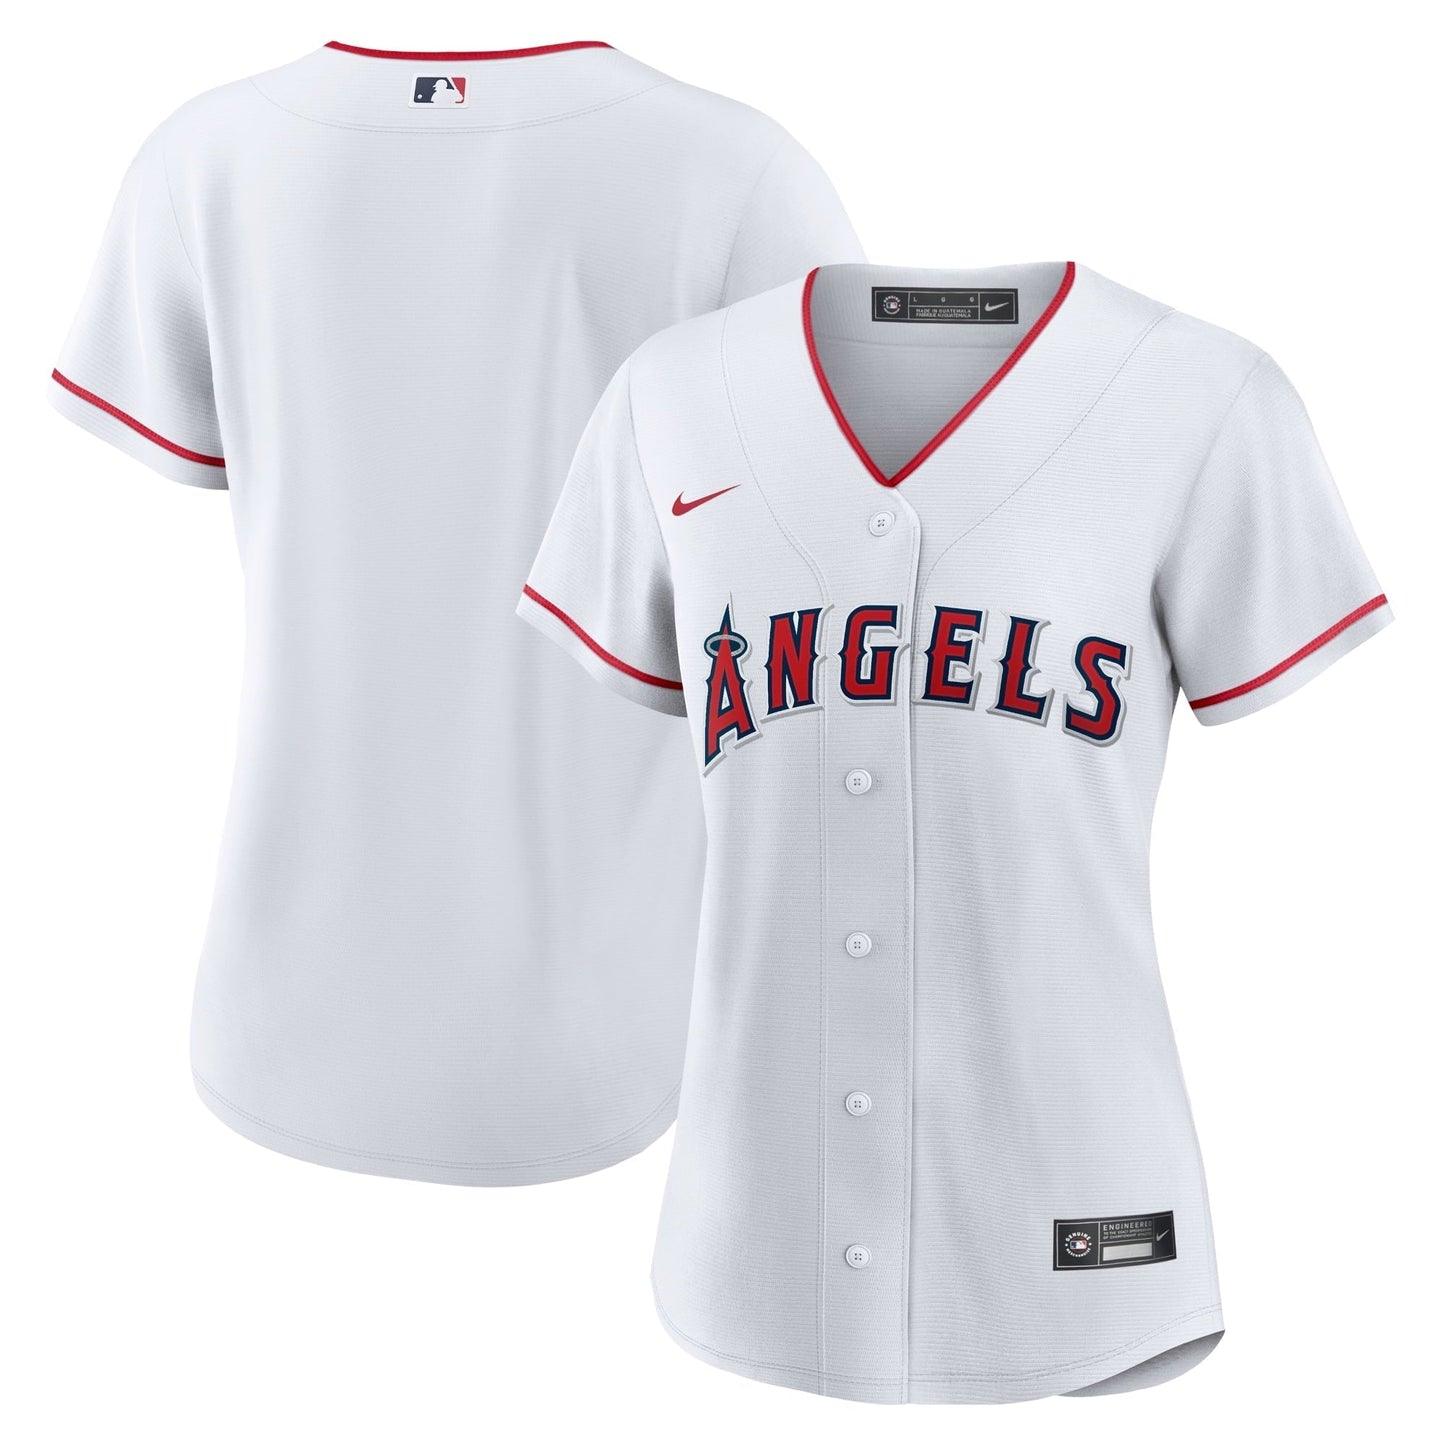 Women's Nike White Los Angeles Angels Home Replica Team Jersey